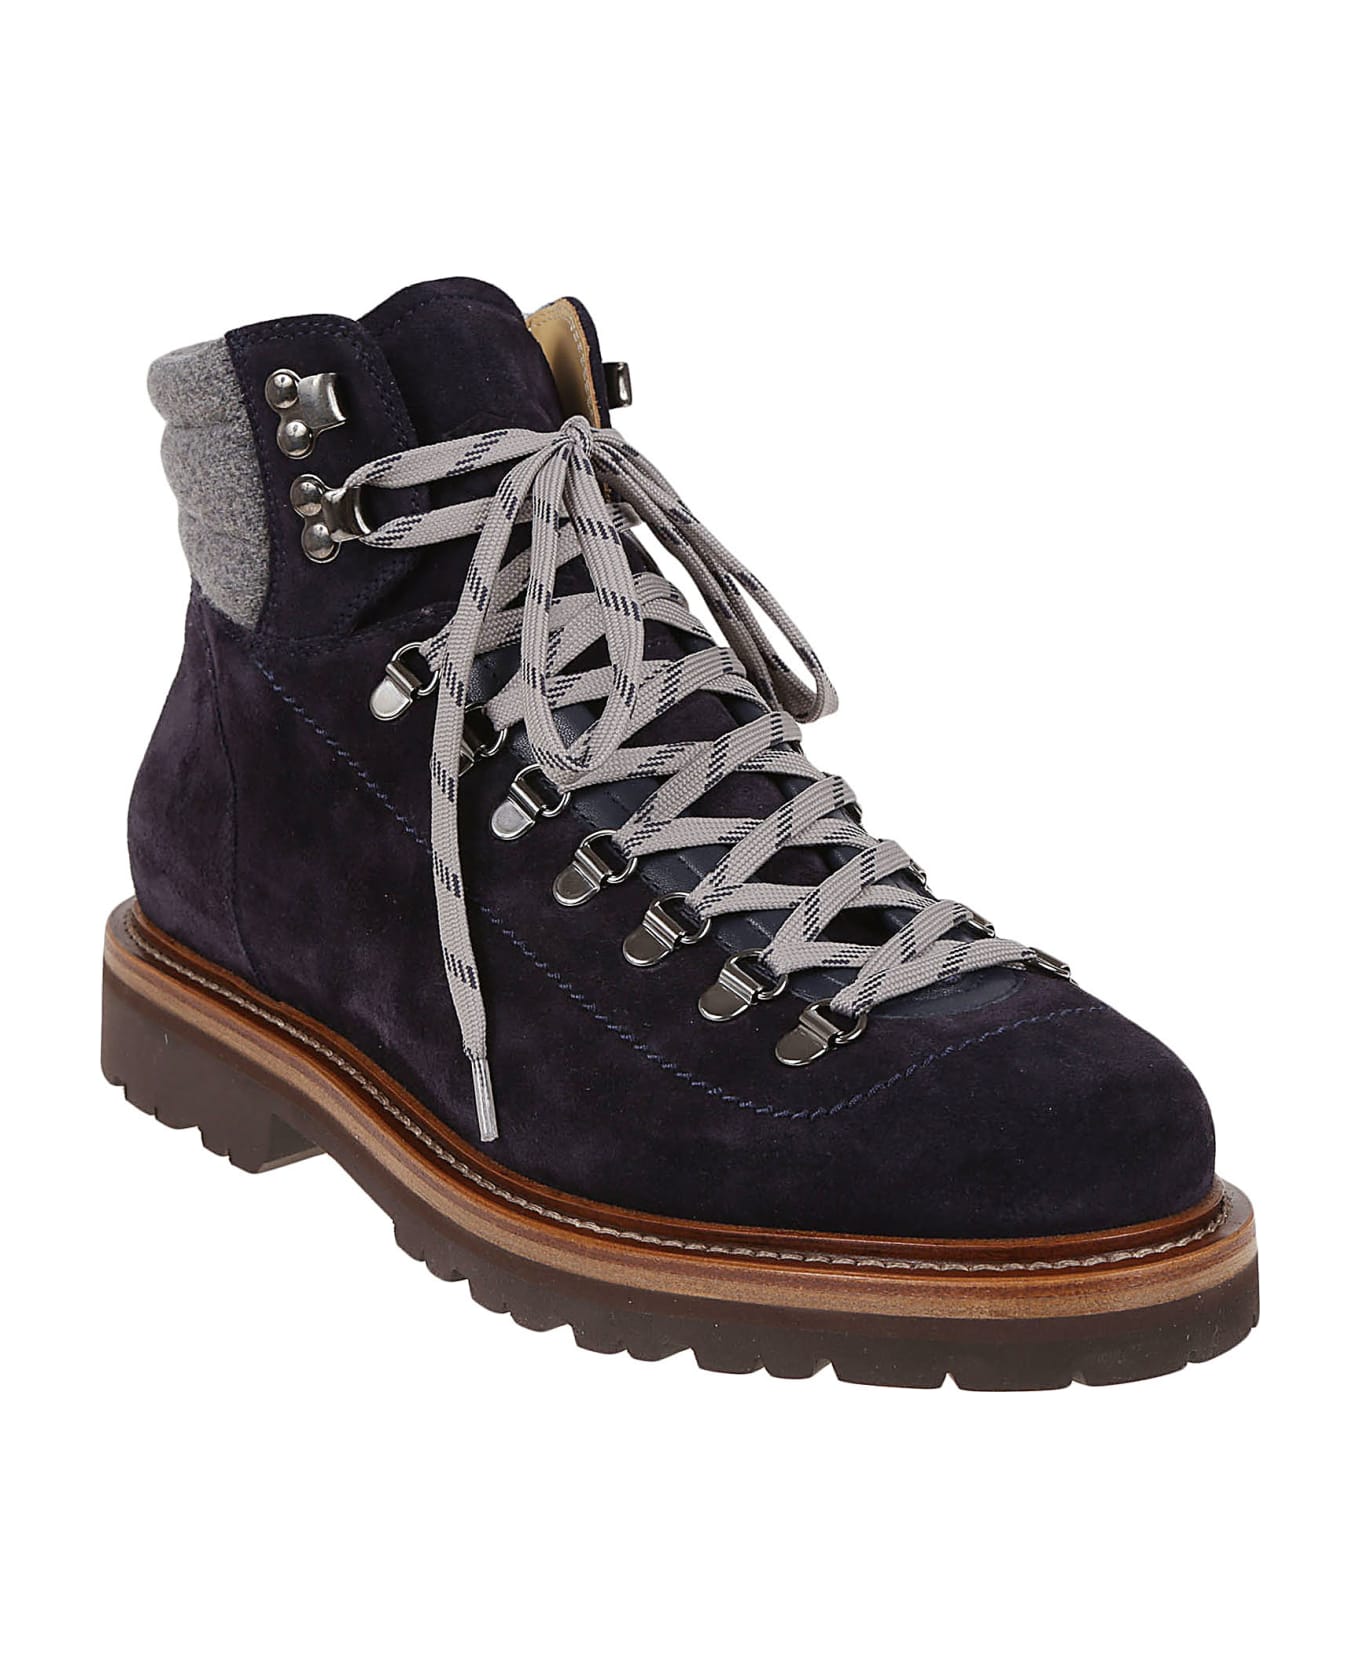 Brunello Cucinelli Boot Mountain Shoe In Soft Suede Leather And Virgin Wool Felt Inserts. Closure With Laces - Cpv46